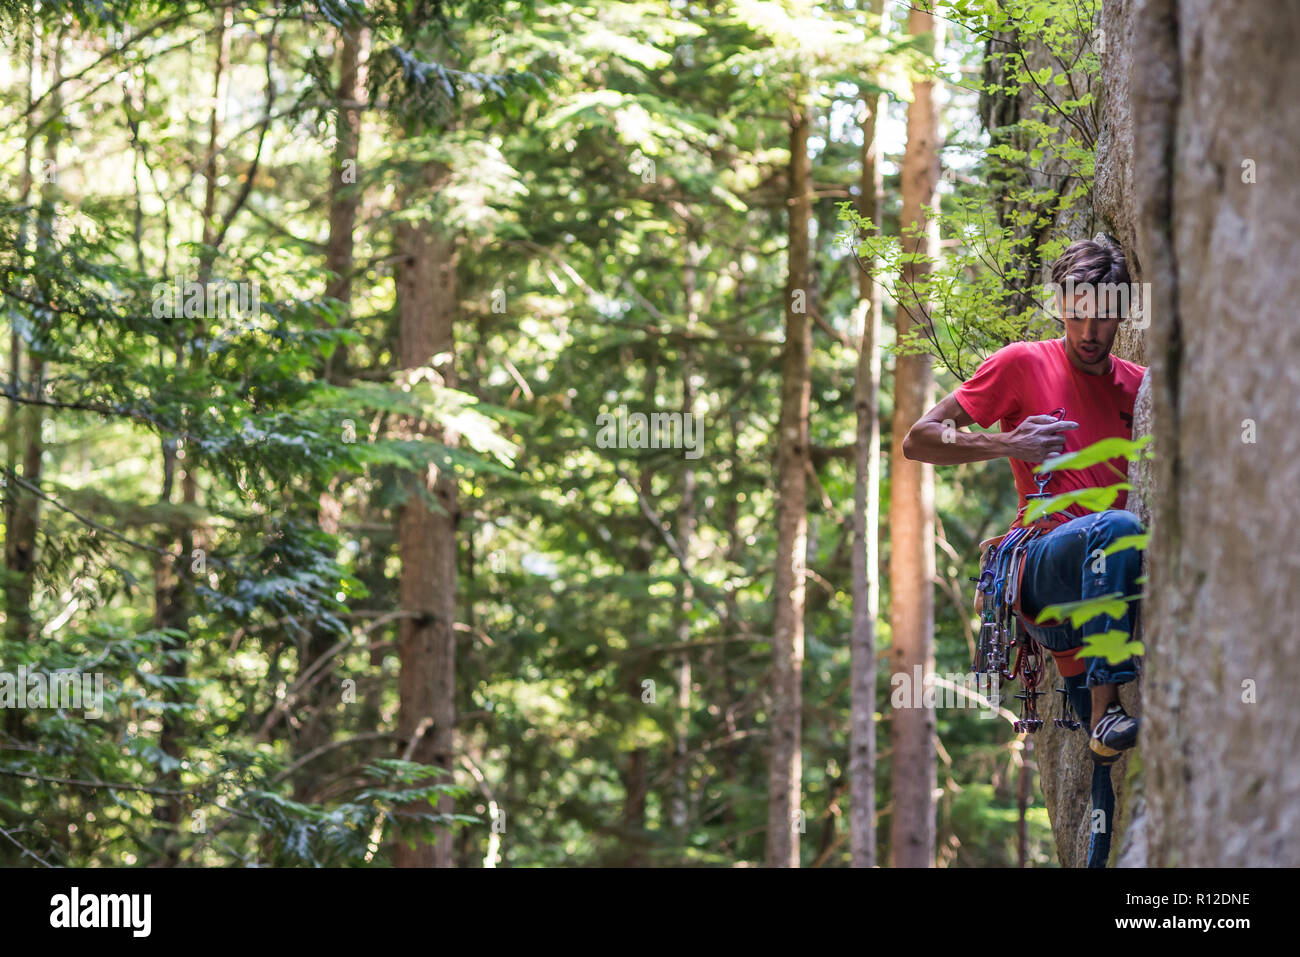 Rock climber scaling rock face close to trees, Squamish, Canada Stock Photo